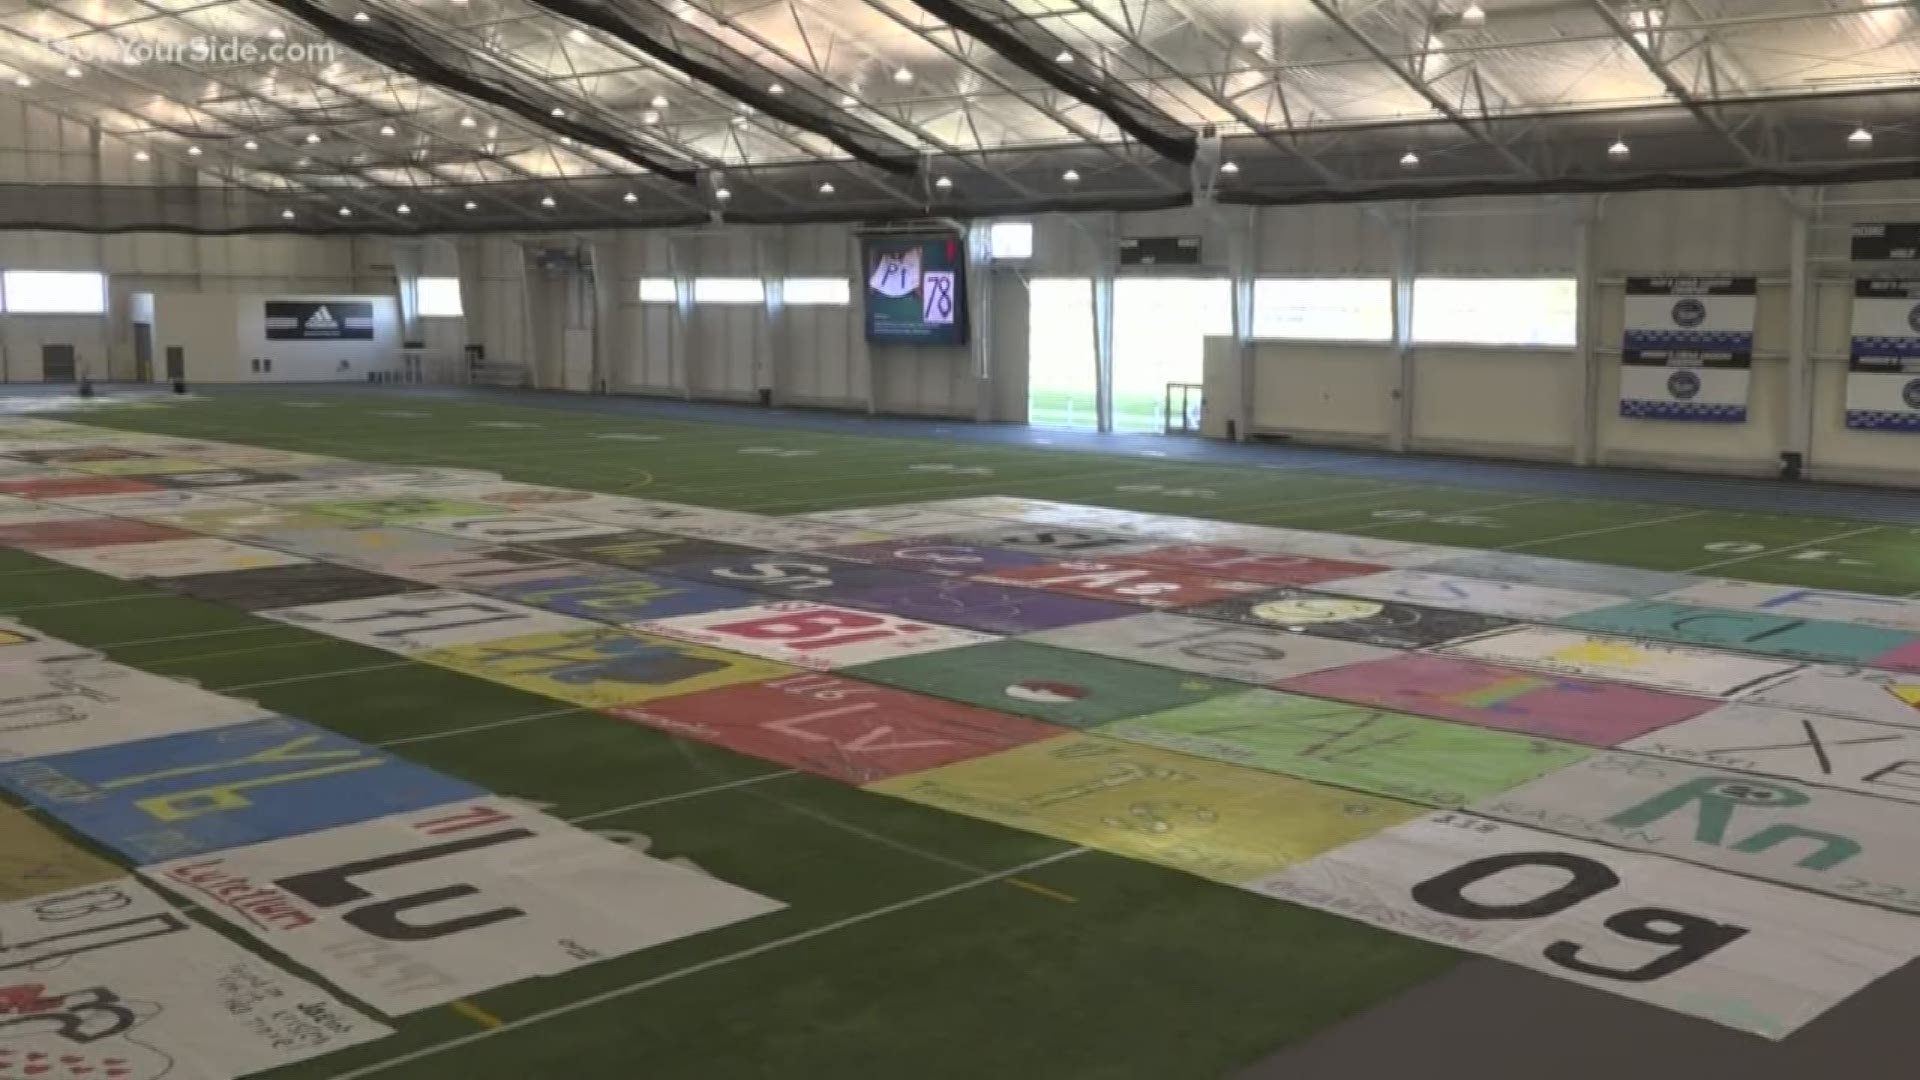 The giant periodic table covered Grand Valley State University's indoor football field.